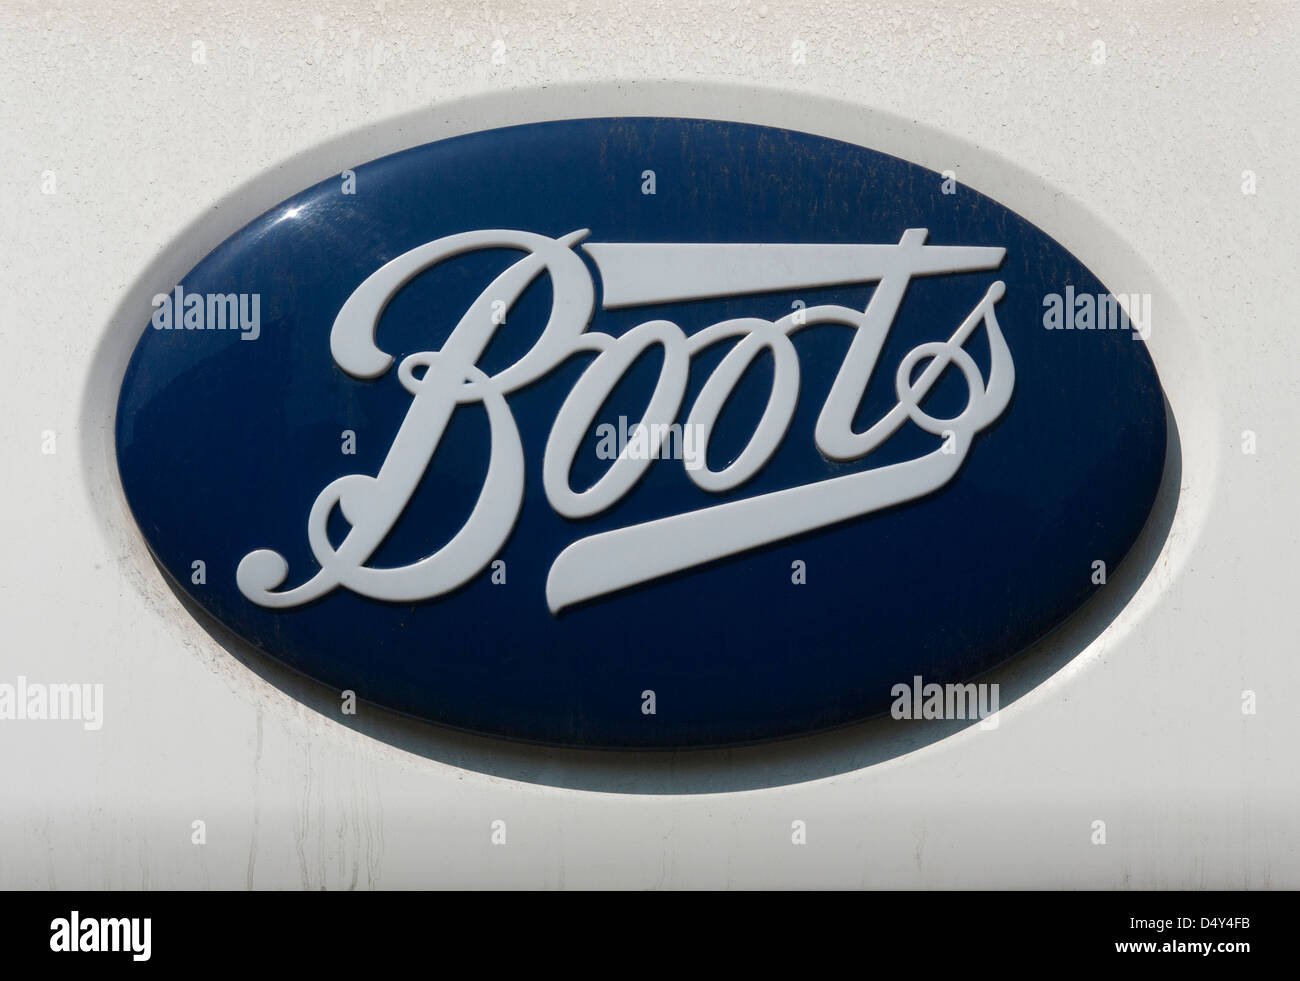 Boots The Chemist Sign High Street Shops Signs uk Stock Photo